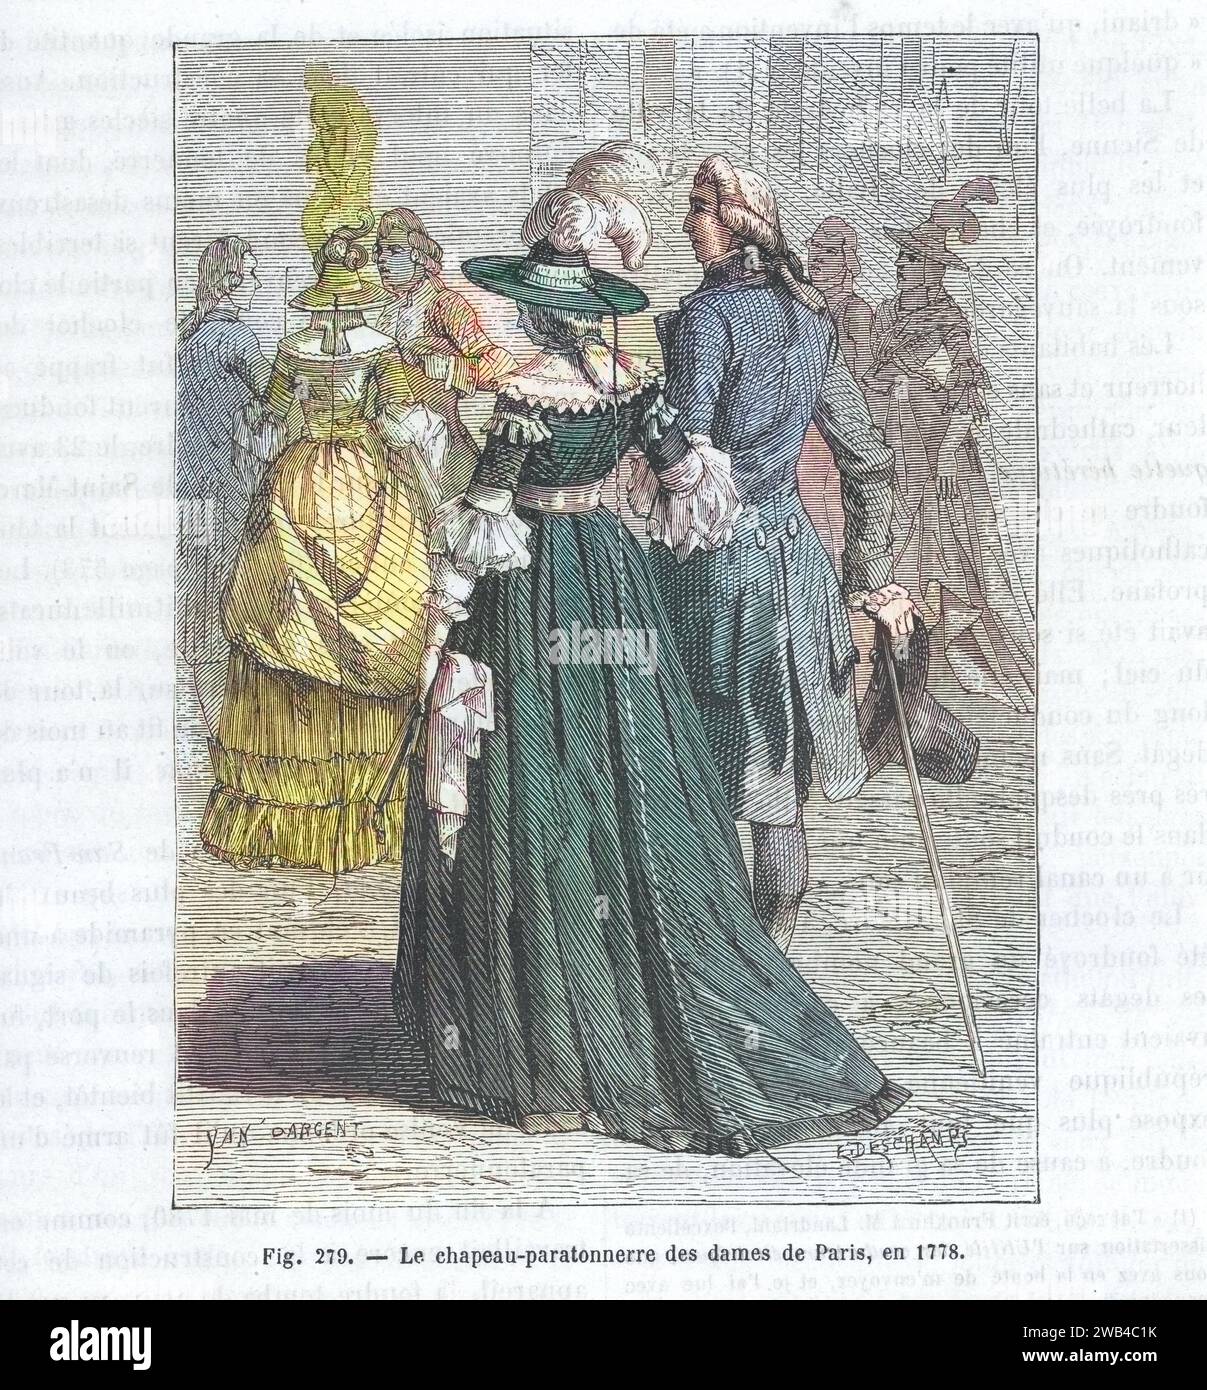 Fashion in Paris in 1778: lady wearing a 'lightning rod hat', protecting her from lightning.  Illustration from 'Les Merveilles de la science ou description populaire des inventions modernes' written by Louis Figuier and published in 1867 by Furne, Jouvet et Cie. Stock Photo